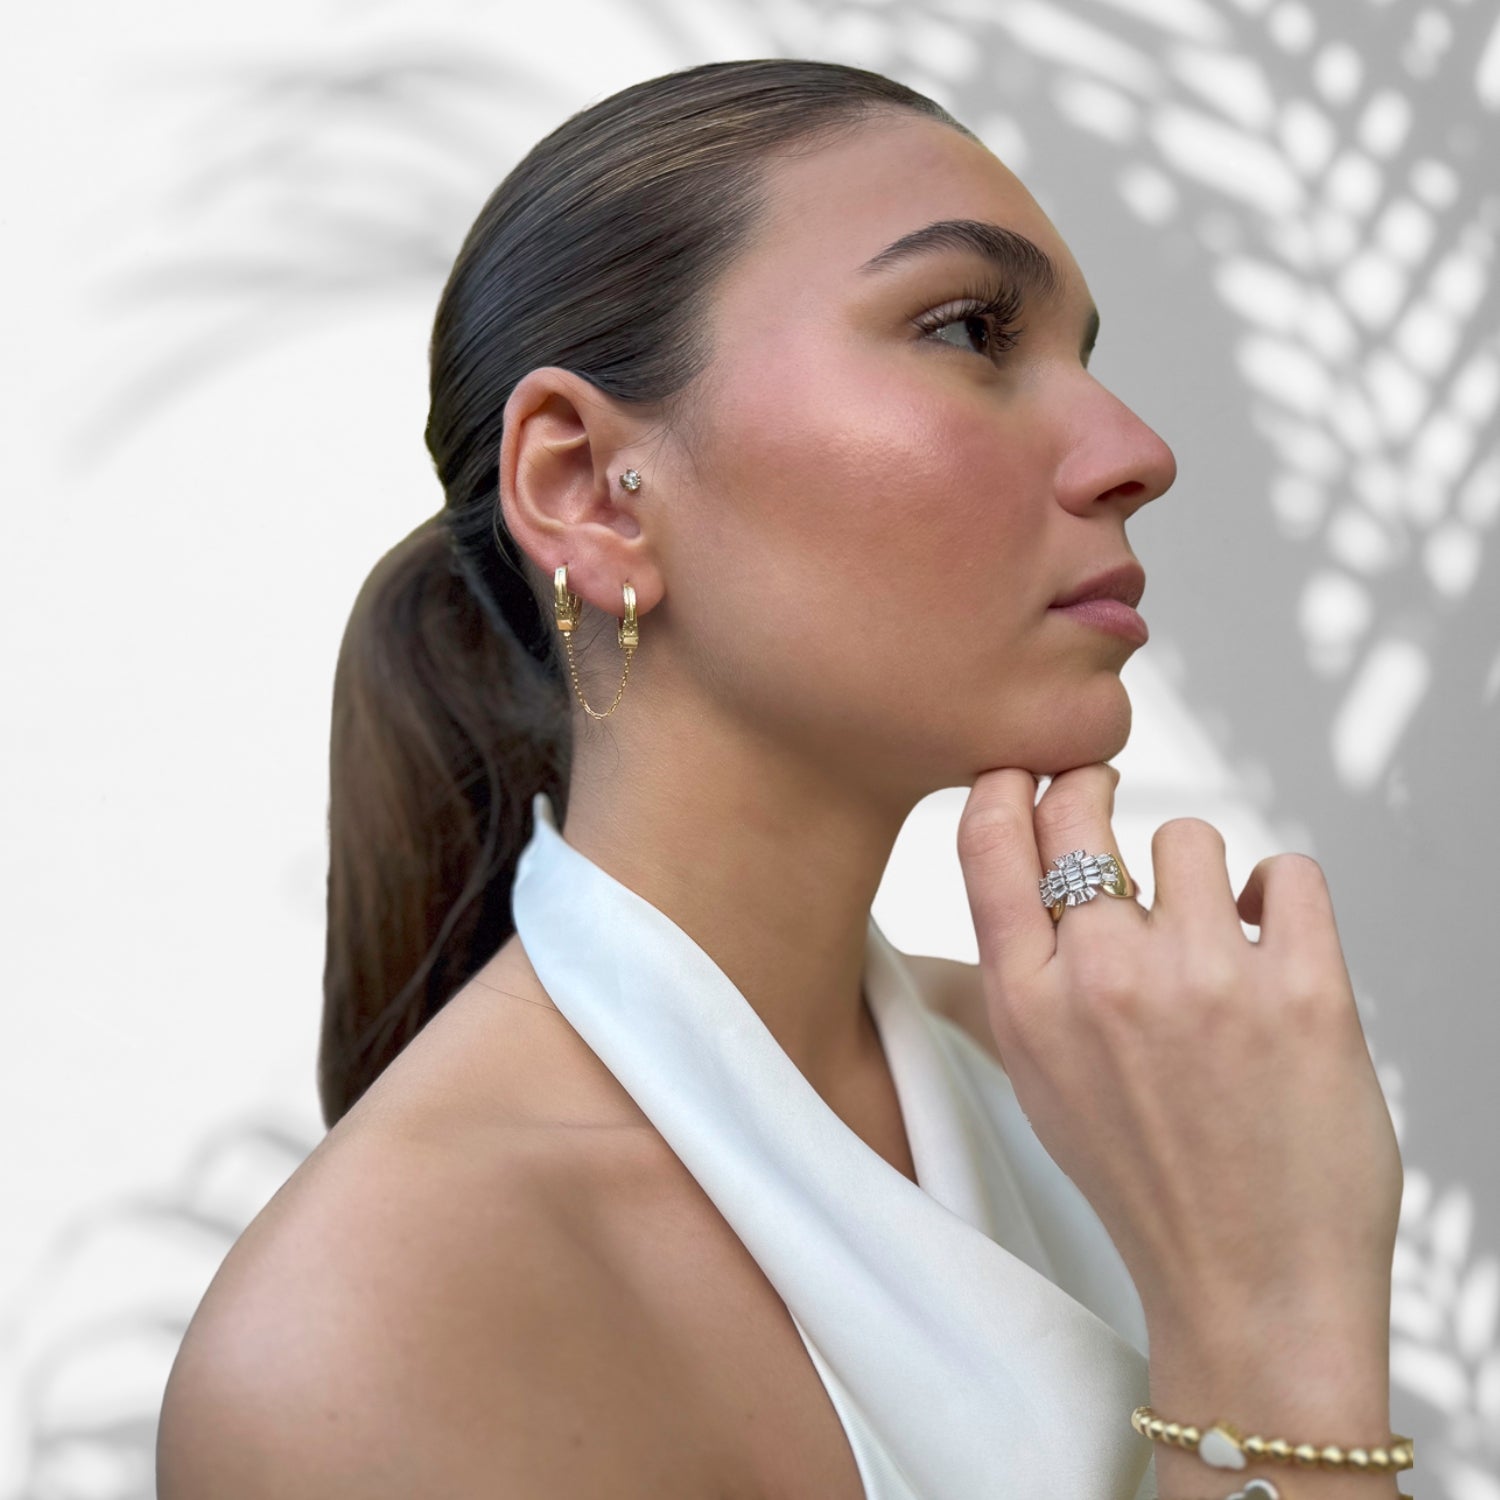 Model Displaying Unapologetic Confidence with Pave Cz Diamonds